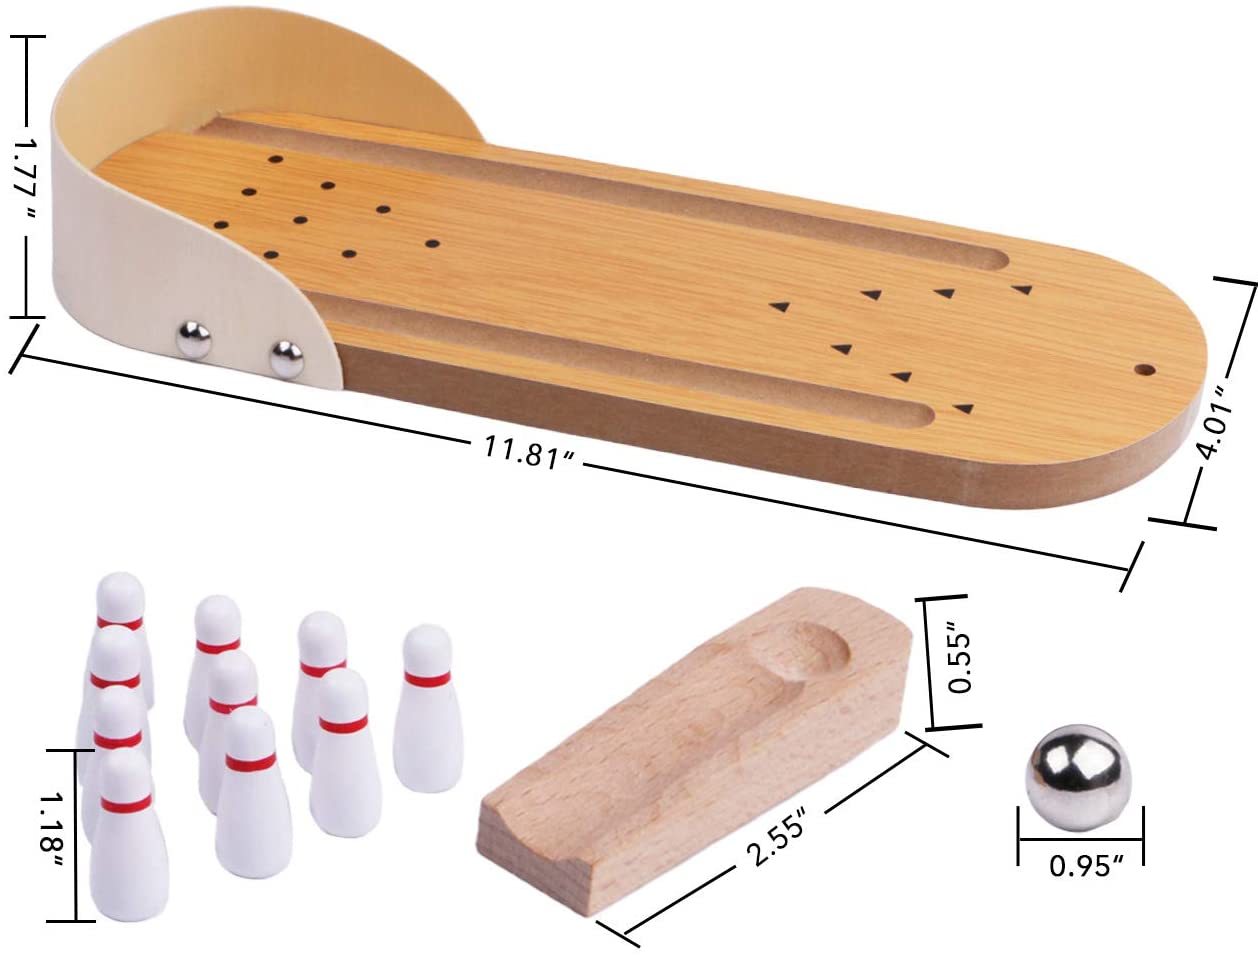 KateDy Wooden Mini Bowling Game Set with Lane,Home Office Desk Interactive Tabletop Bowling Toy for Kids Adults Stress Relief&Intelligence Development&Party Favor,Easy to Assemble&Play 1pc 